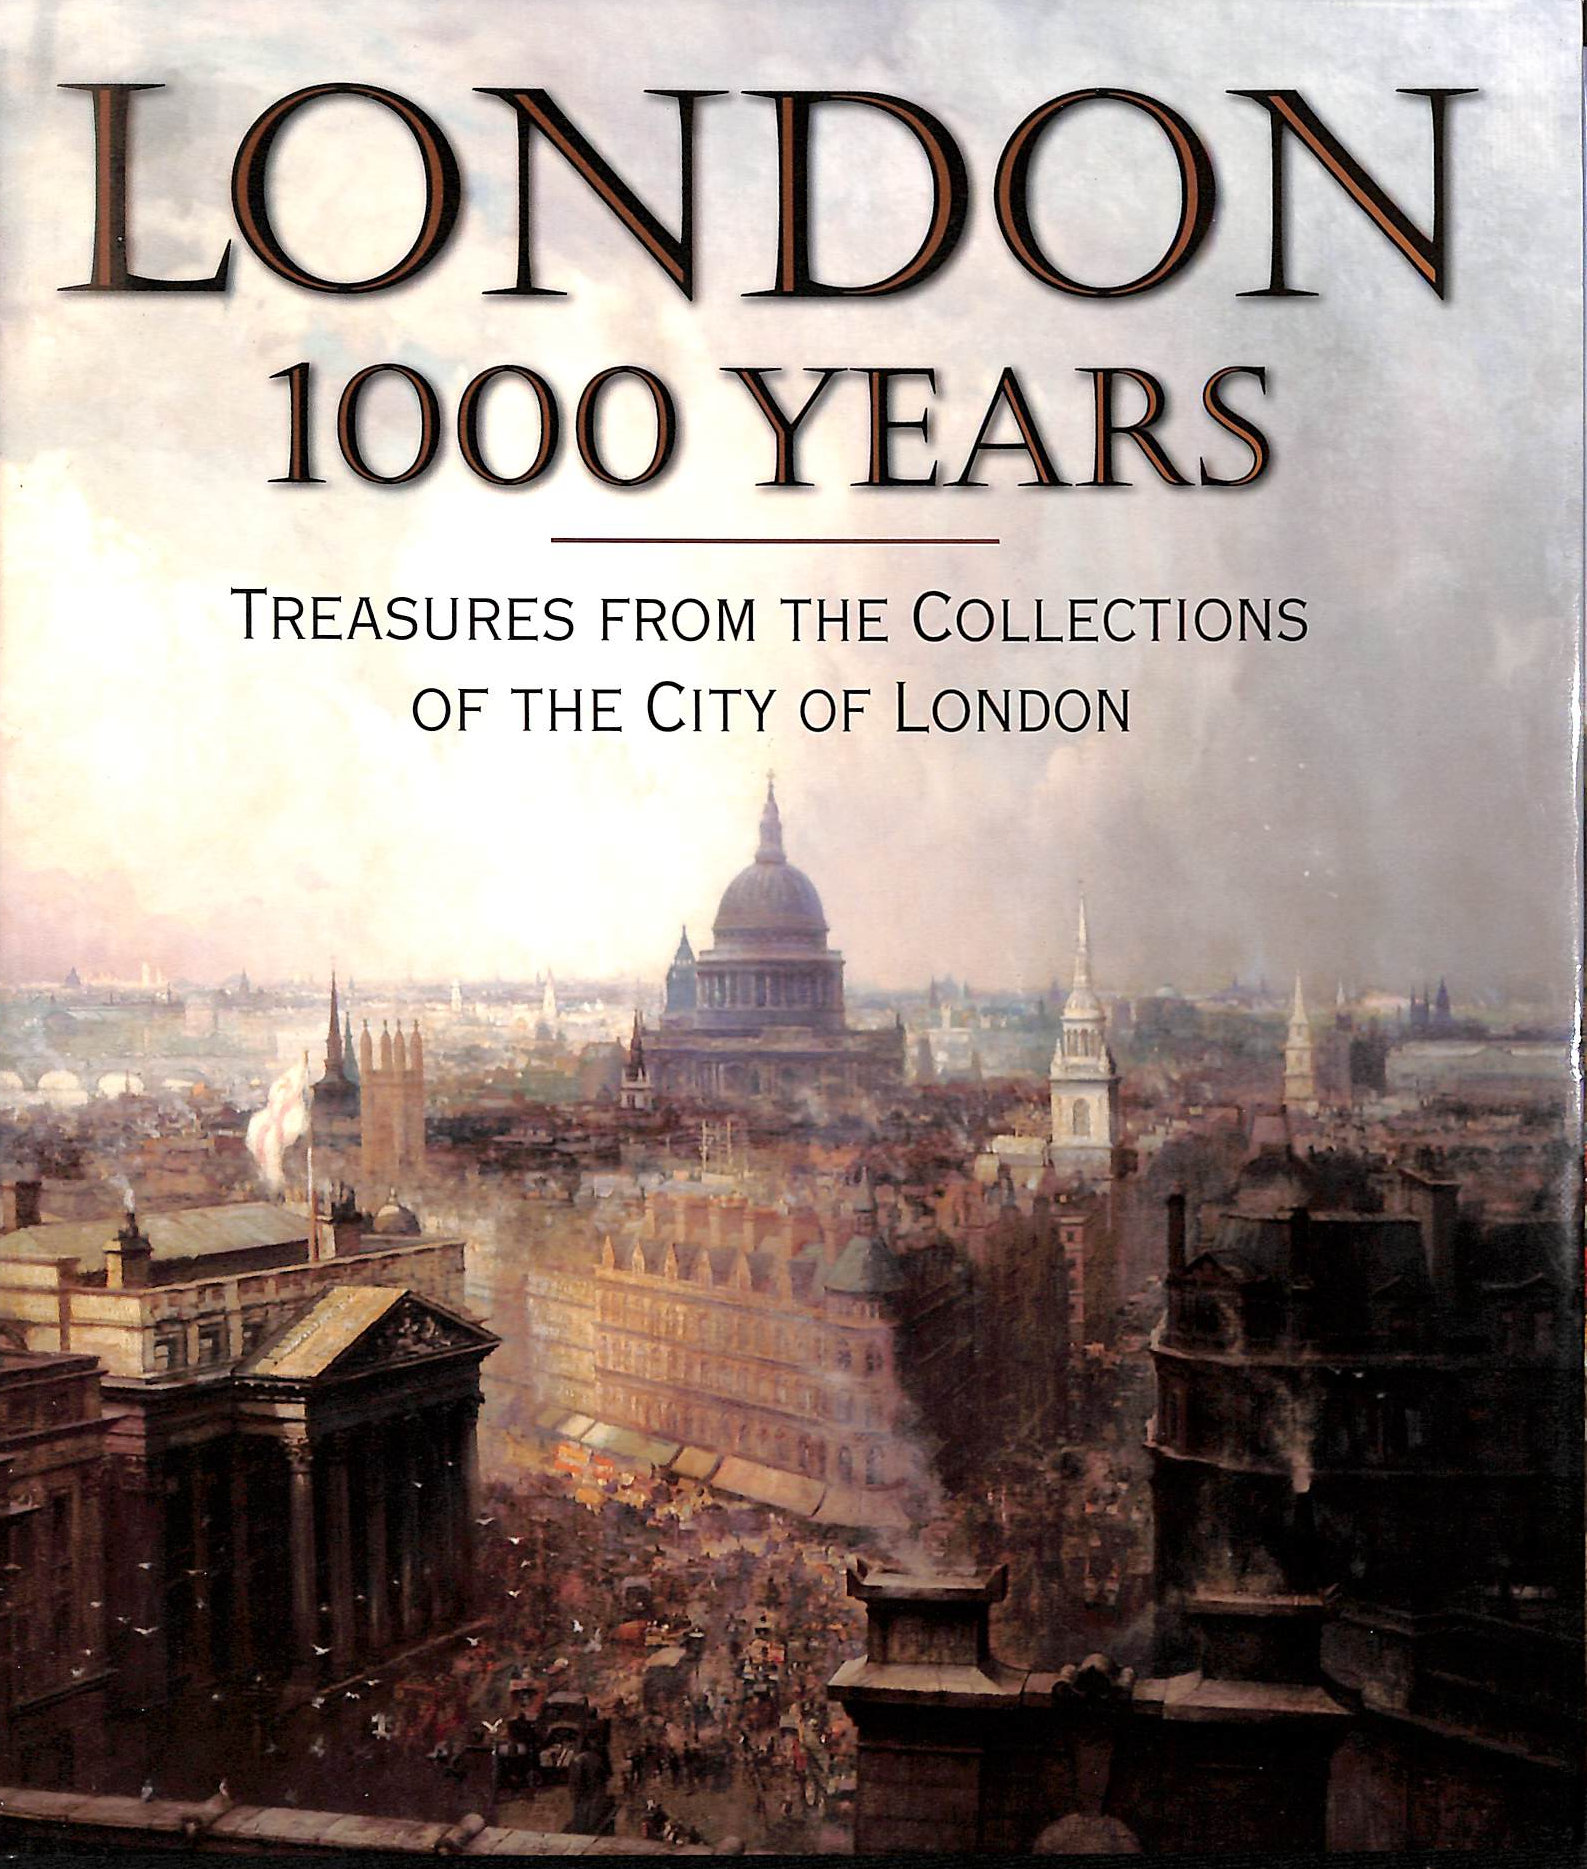 DAVID PEARSON - London 1000 Years: Treasures from the Collections of the City of London